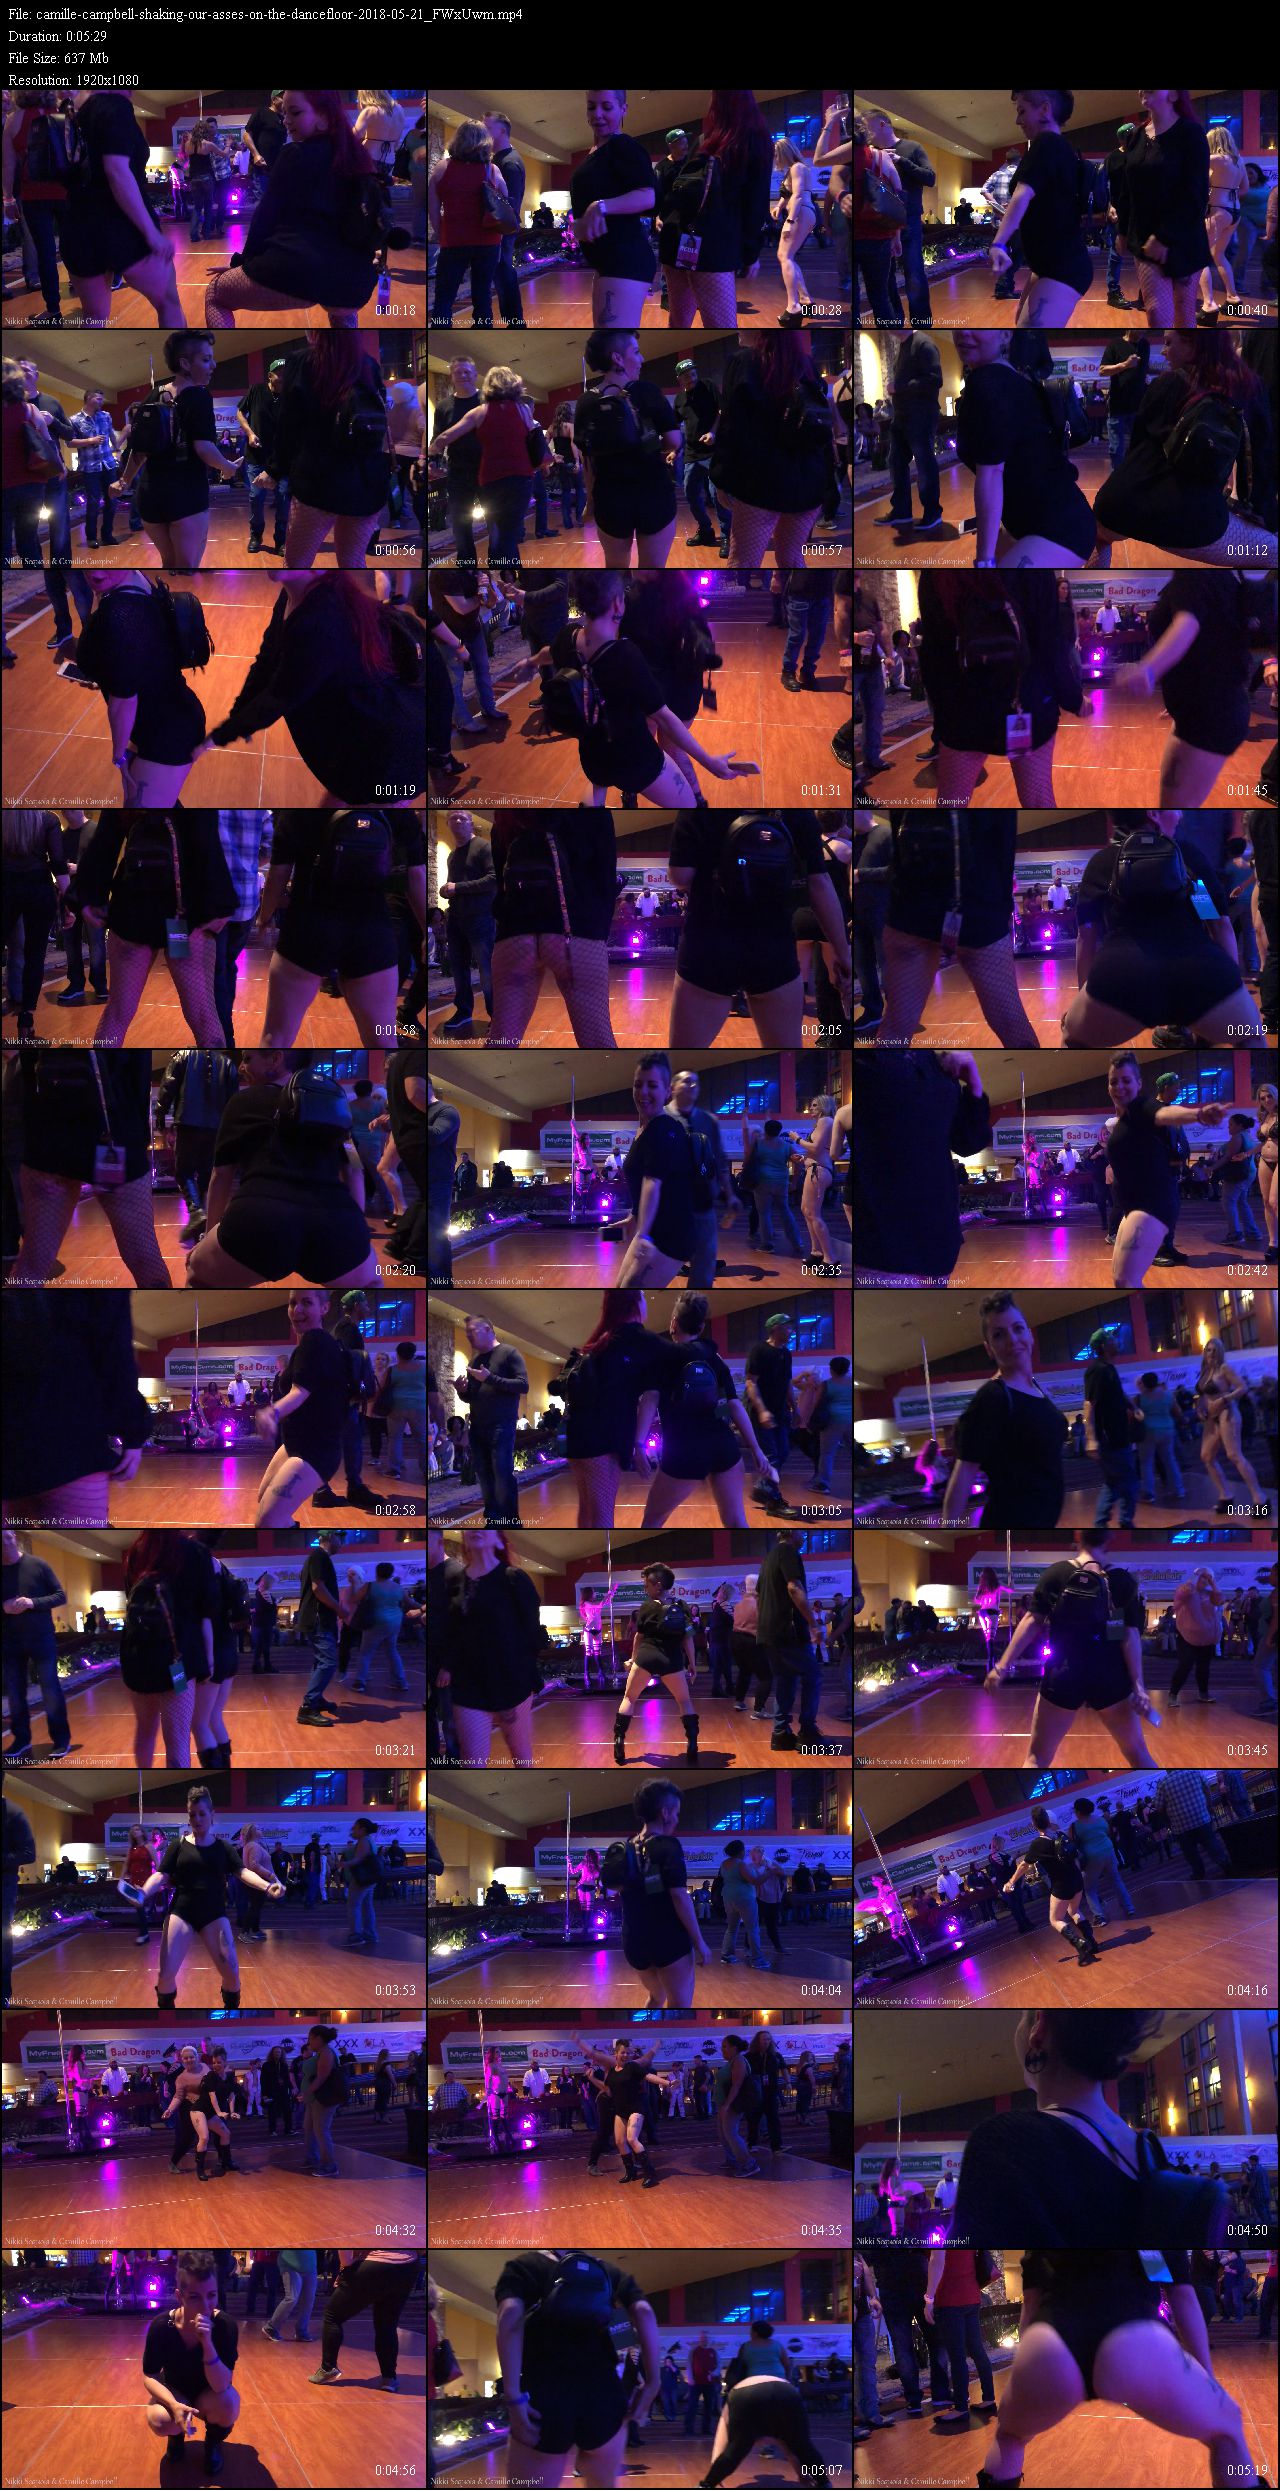 camille-campbell-shaking-our-asses-on-the-dancefloor-2018-05-21 FWxUwm Preview